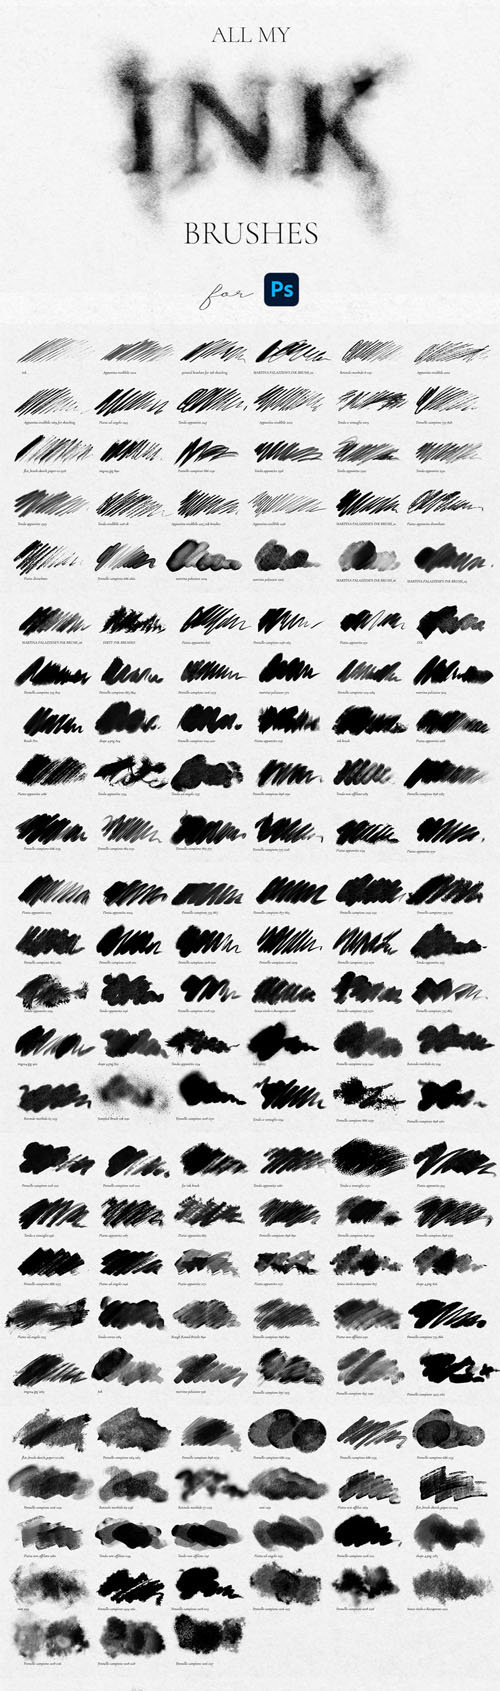 150+ Ink Effect Brushes for Photoshop